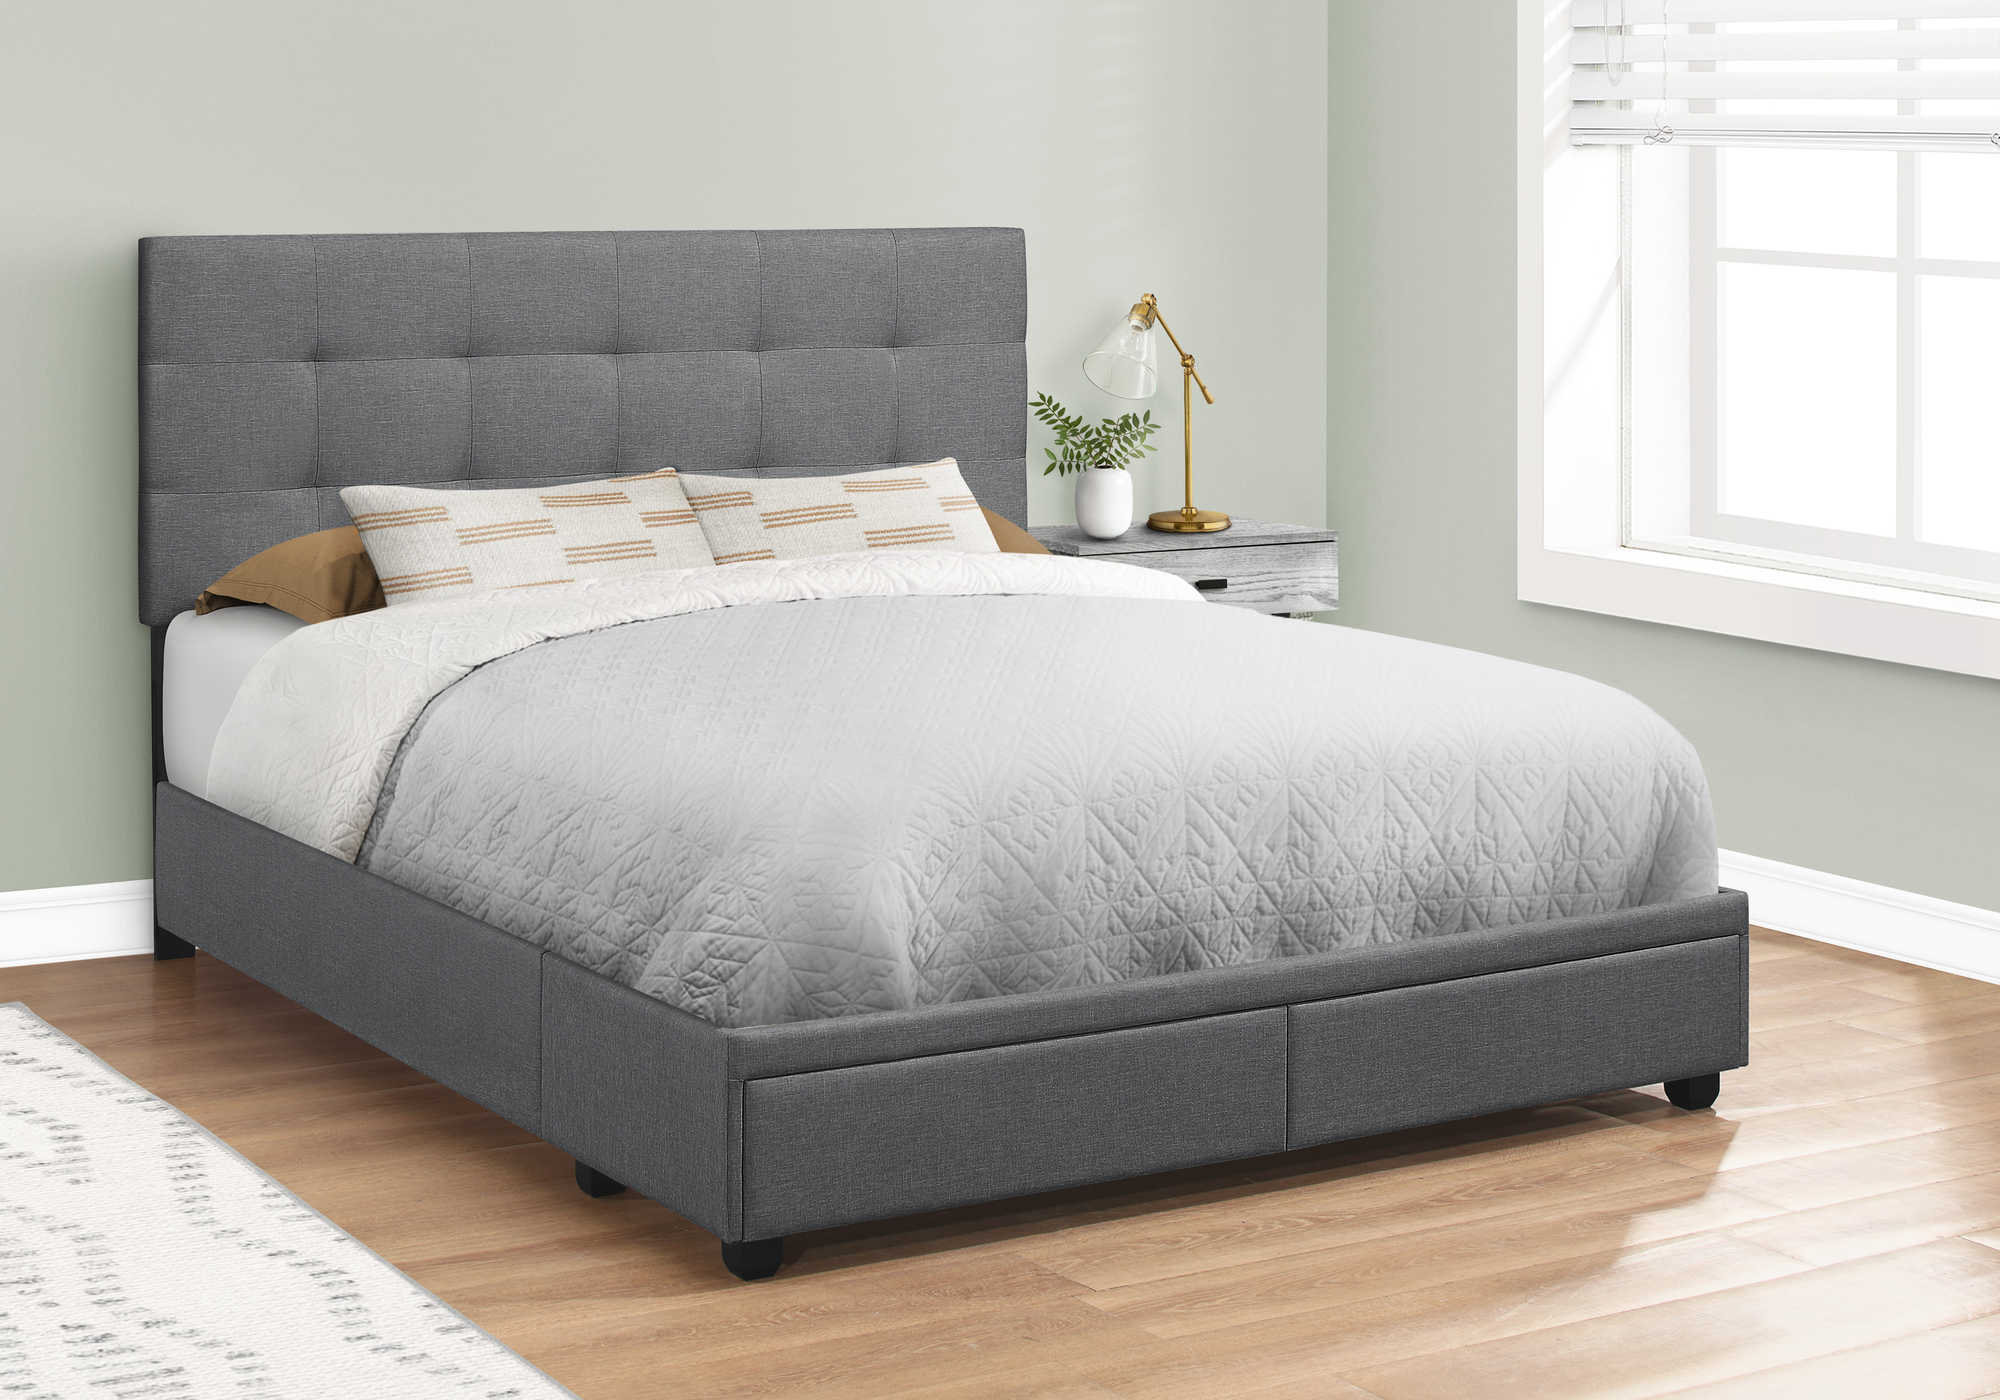 I 6022Q - BED - QUEEN SIZE / DARK GREY LINEN WITH 2 STORAGE DRAWERS BY MONARCH SPECIALTIES INC